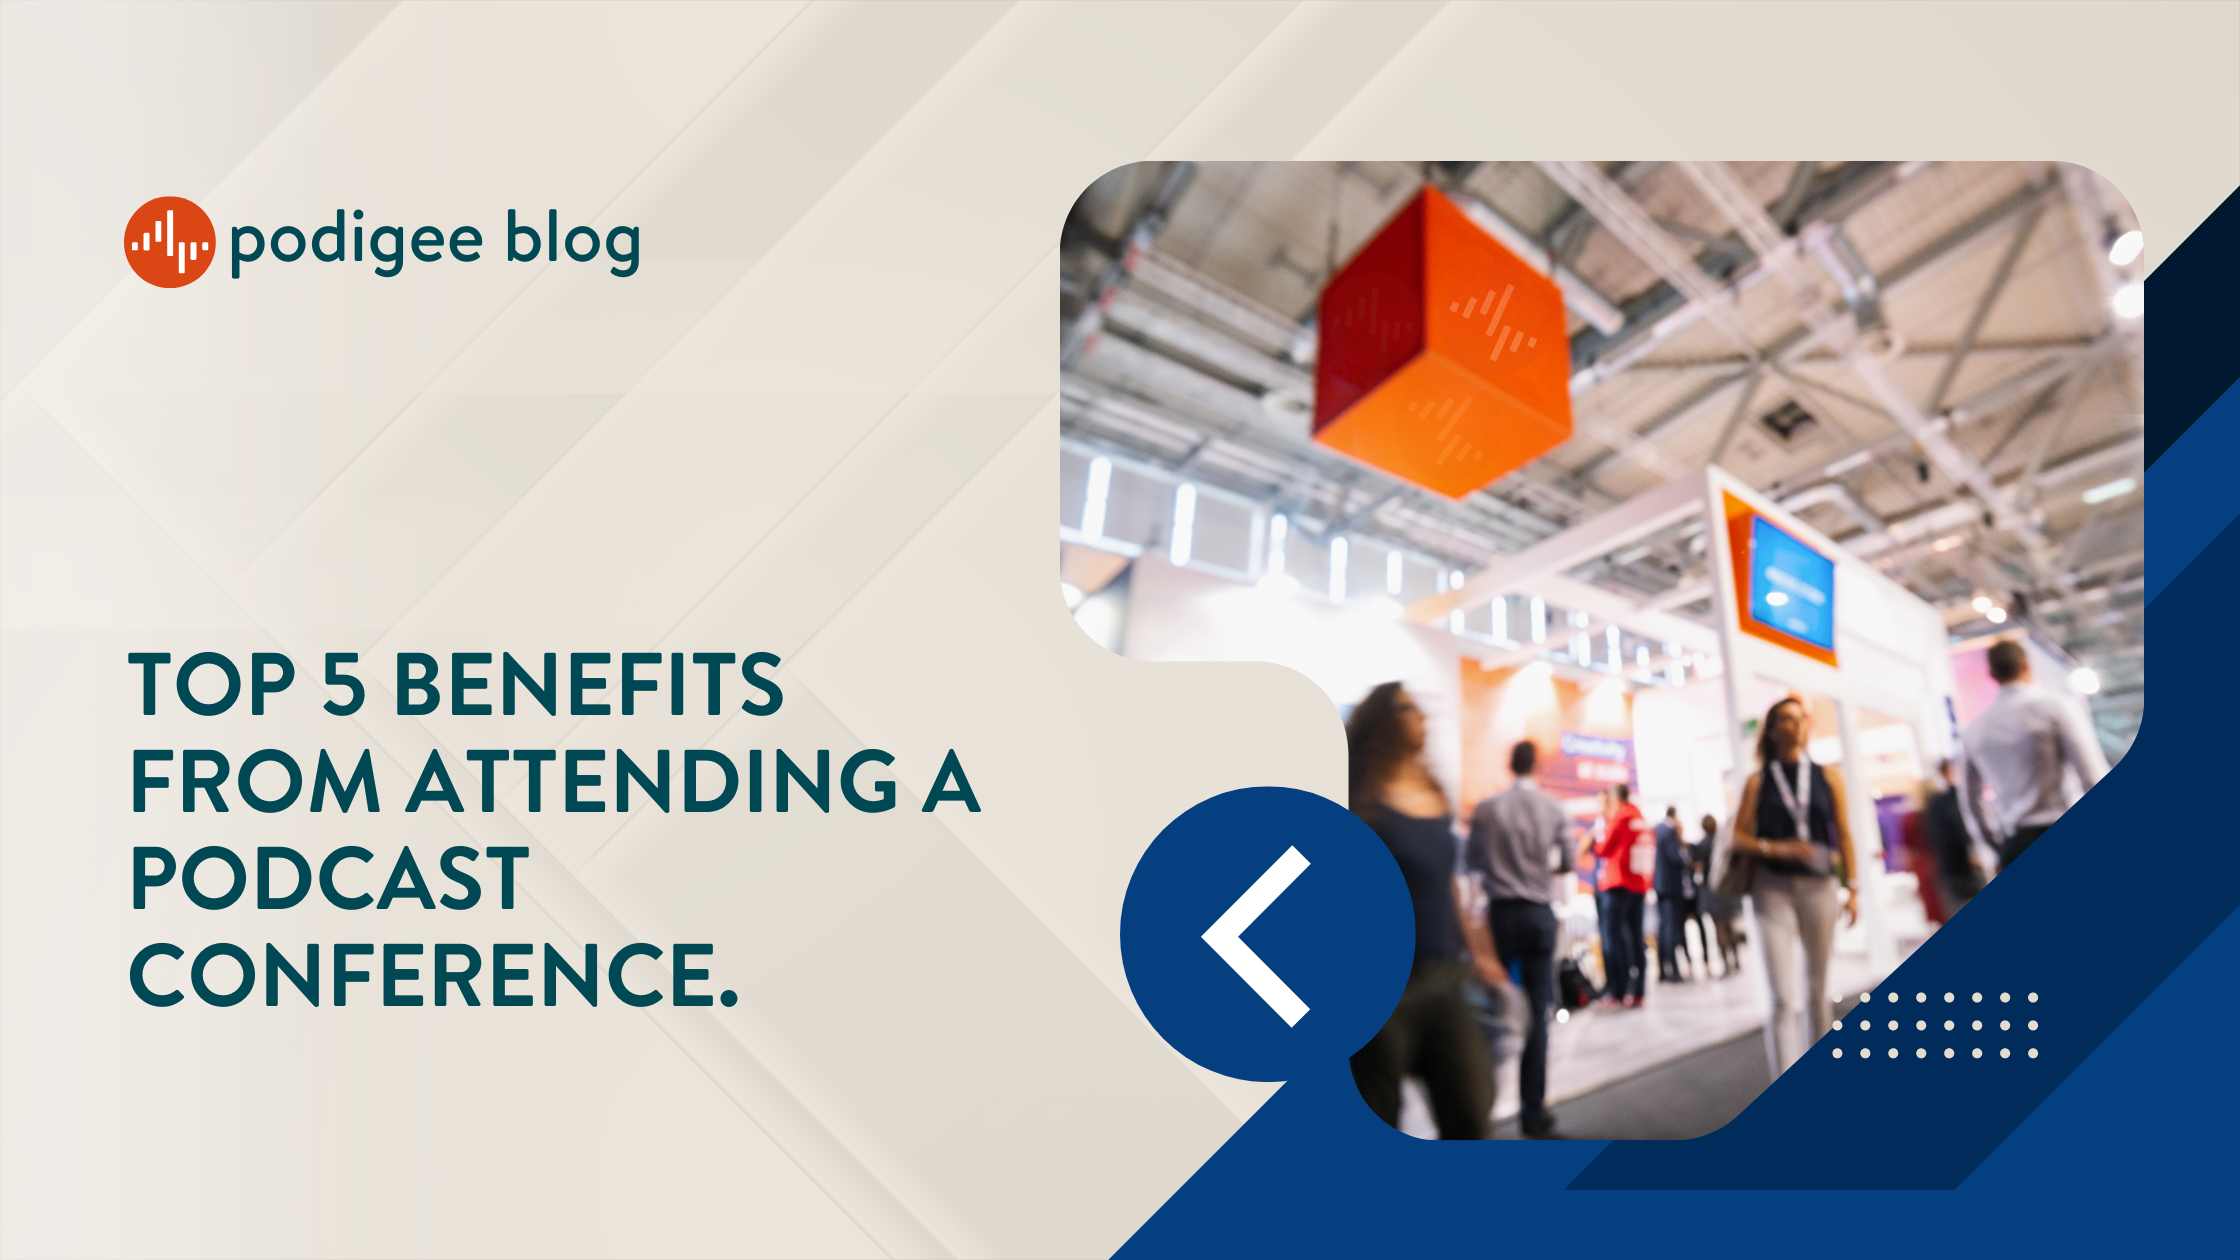 Top 5 Benefits from attending a Podcast Conference